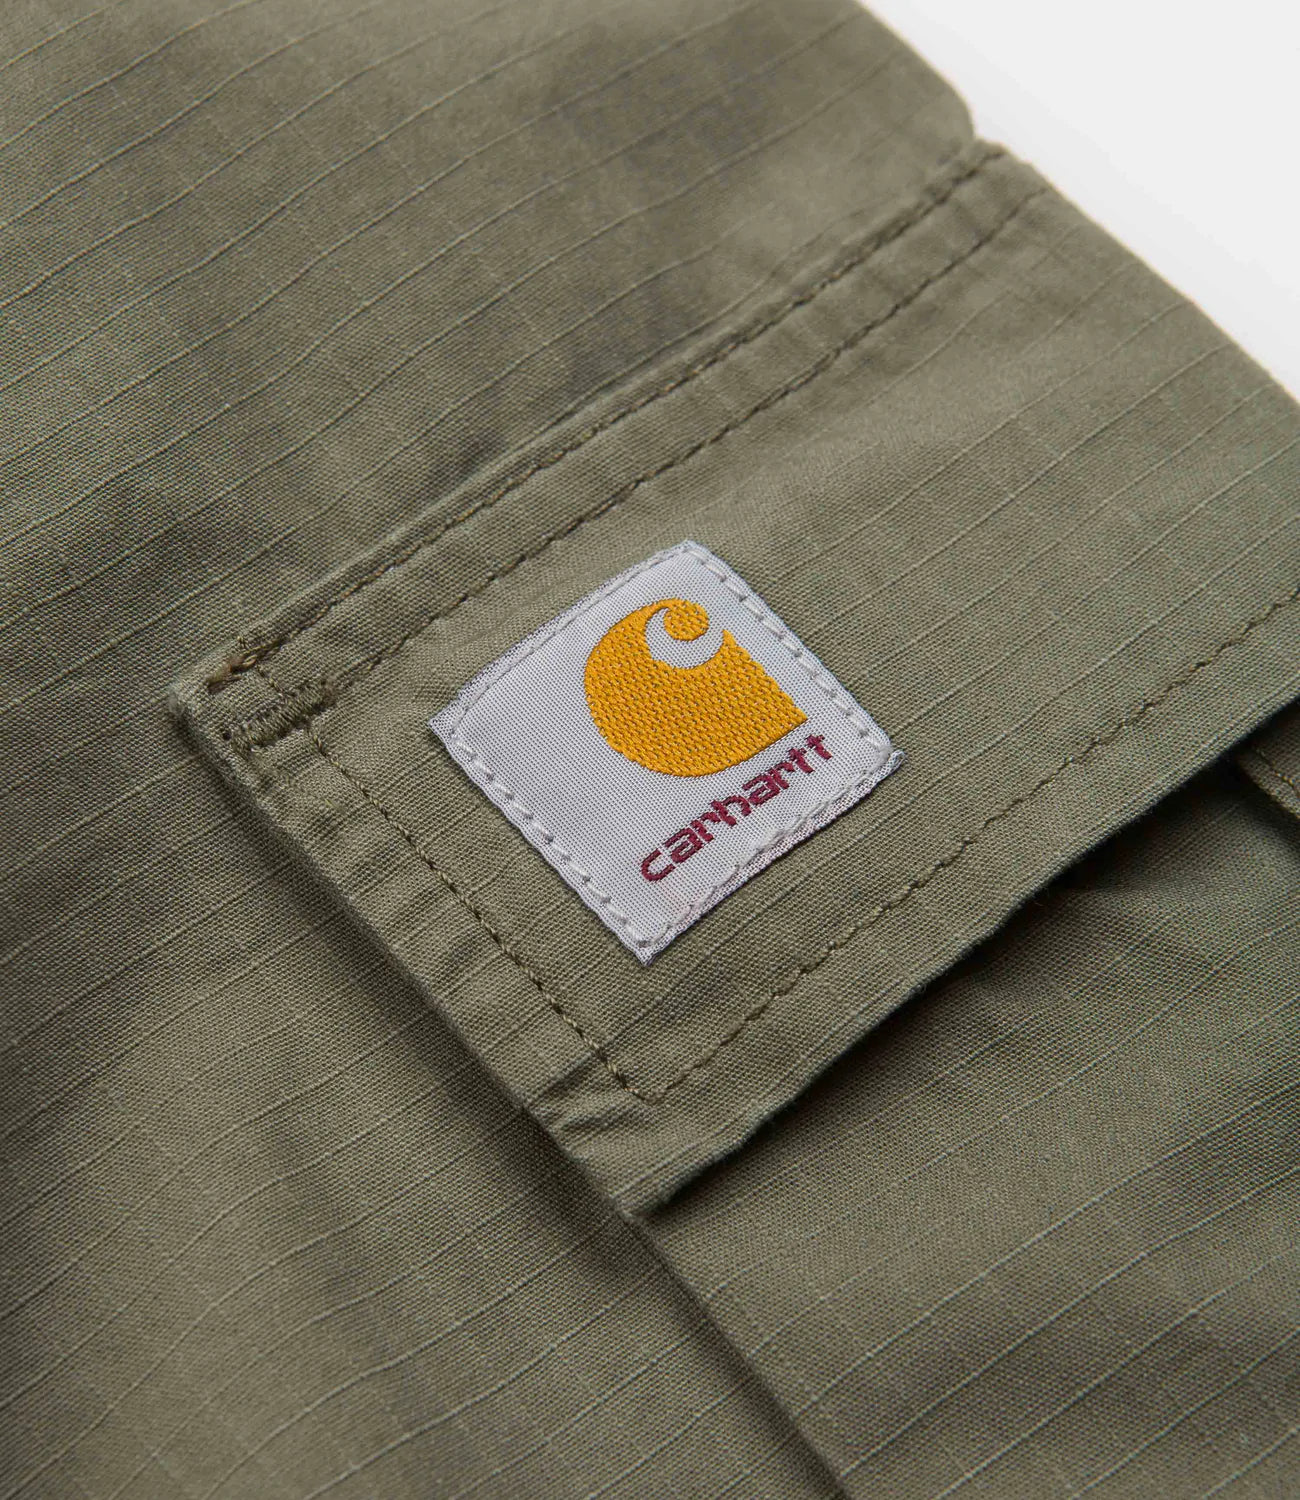 SparkyStore - New Carhartt WIP Pants in store. Cargo's